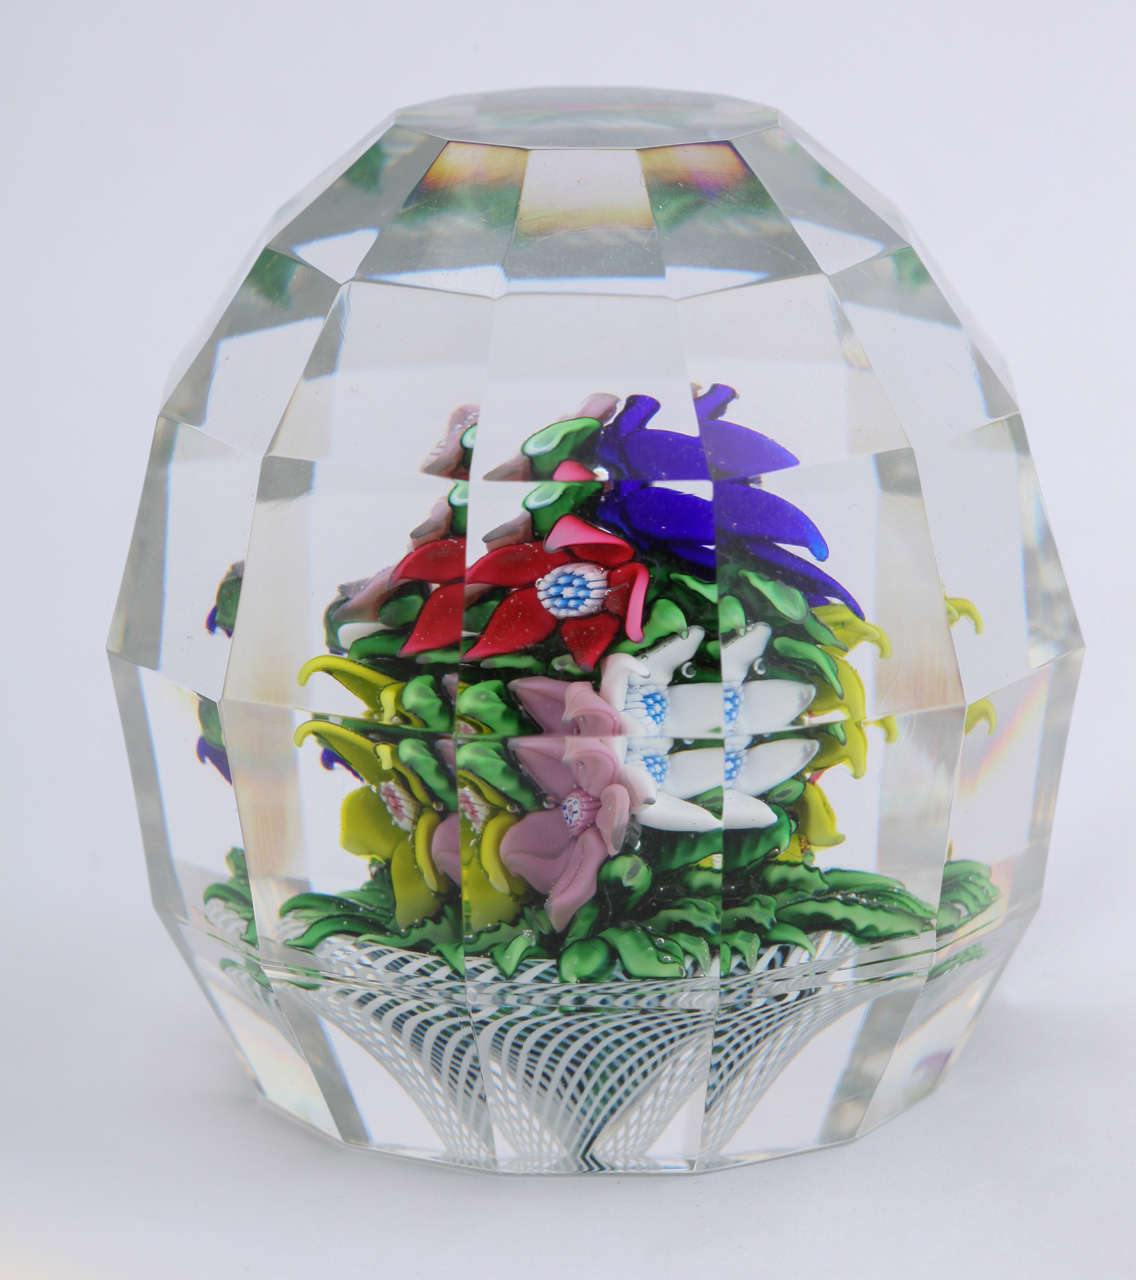 An unique 1978 St. Louis upright bouquet paperweight made up of mulit-color flowers and leaves on a white latticinio basket, flat facets, signed SL1978 in the center of a flower and B-A on the base for Andre Bourlard